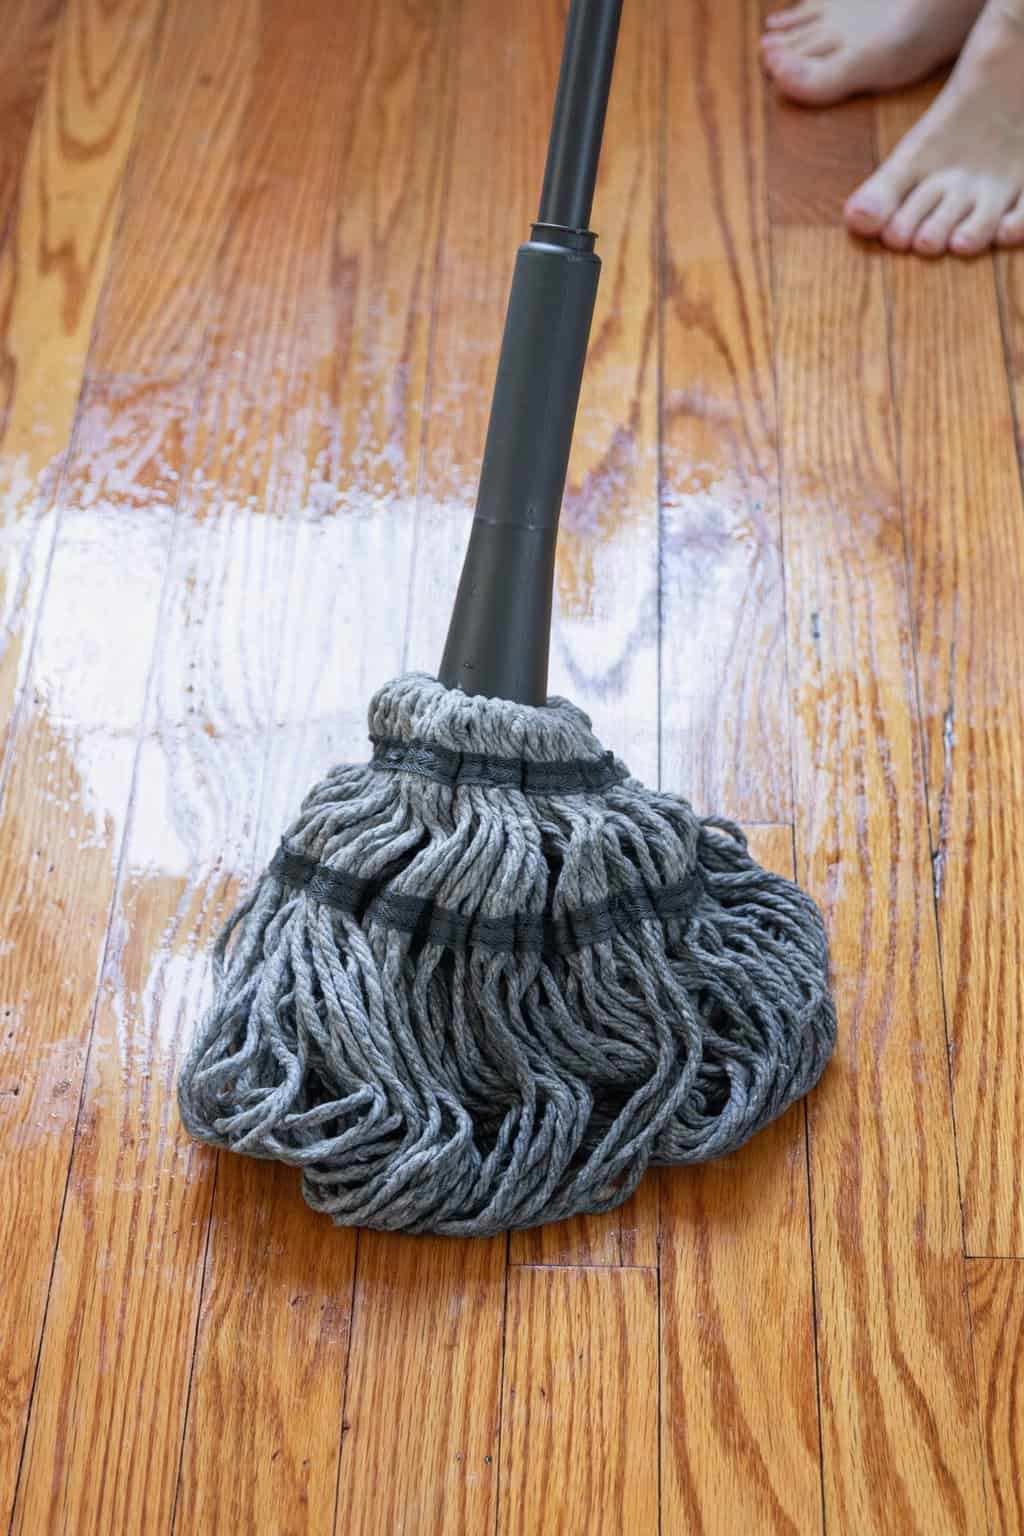 How to mop floors with homemade floor cleaner